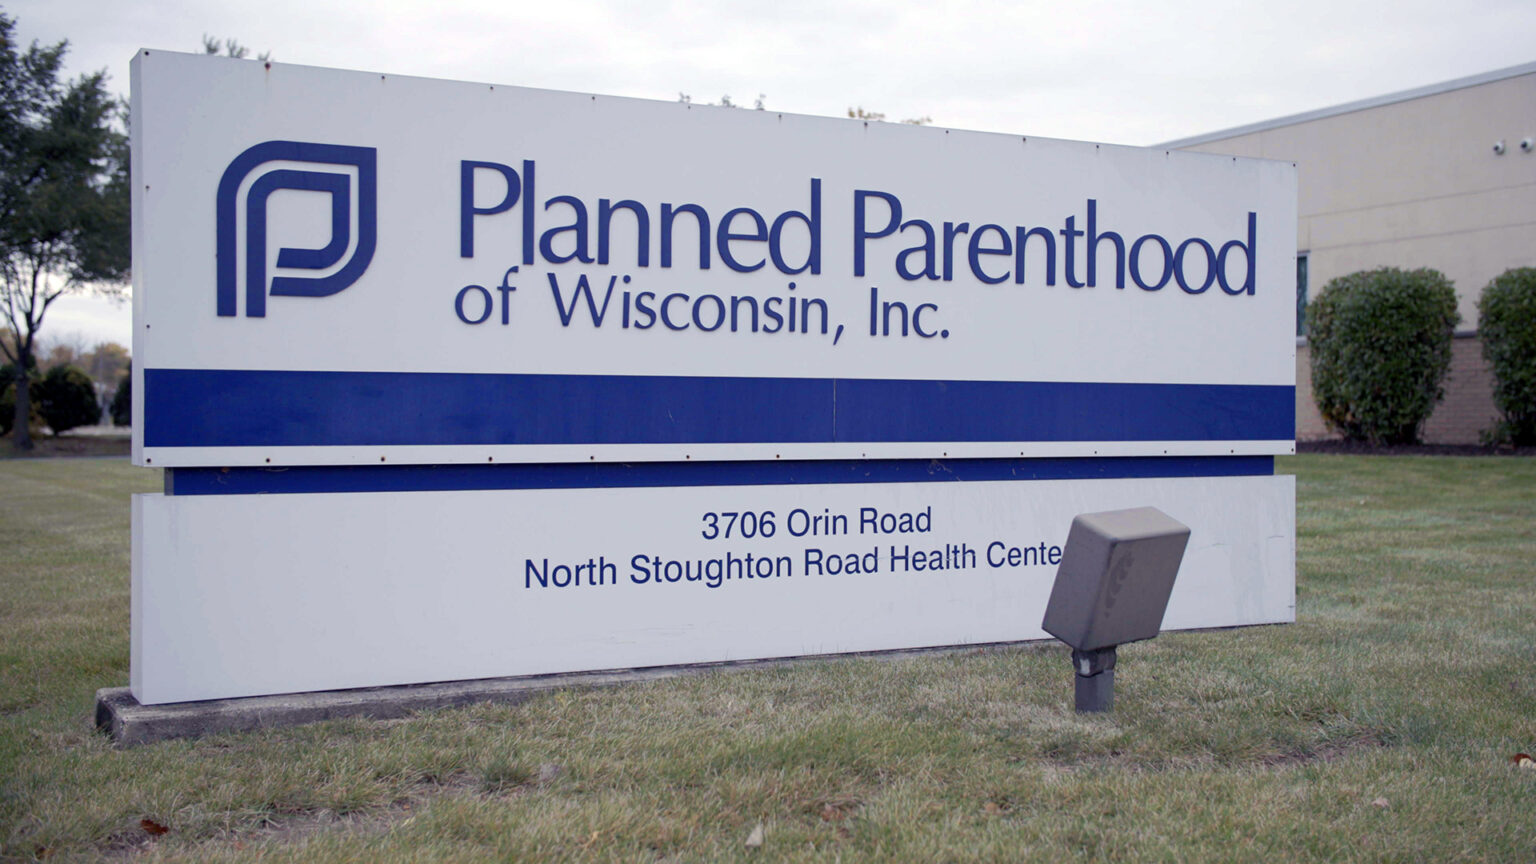 A sign reading Planned Parenthood of Wisconsin, Inc. with an address stands in front of a single-story building surrounded by a lawn, bushes and trees.